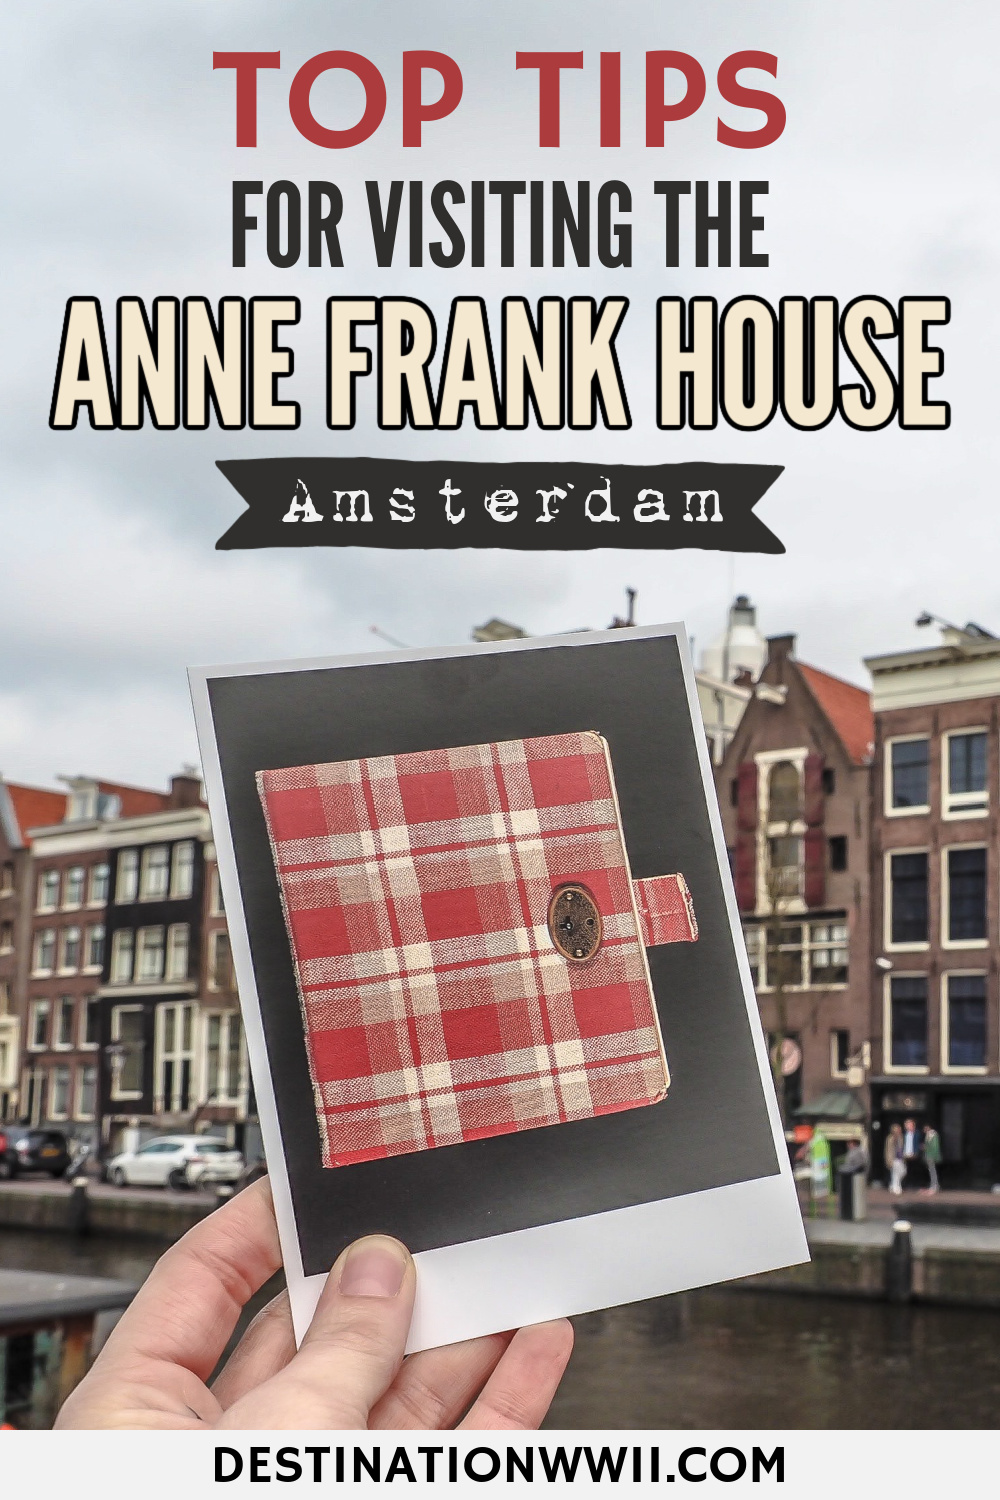 Tips for visiting the Anne Frank House museum in Amsterdam | Diary of Anne Frank #destinationwwii #wwii #annefrank #amsterdam